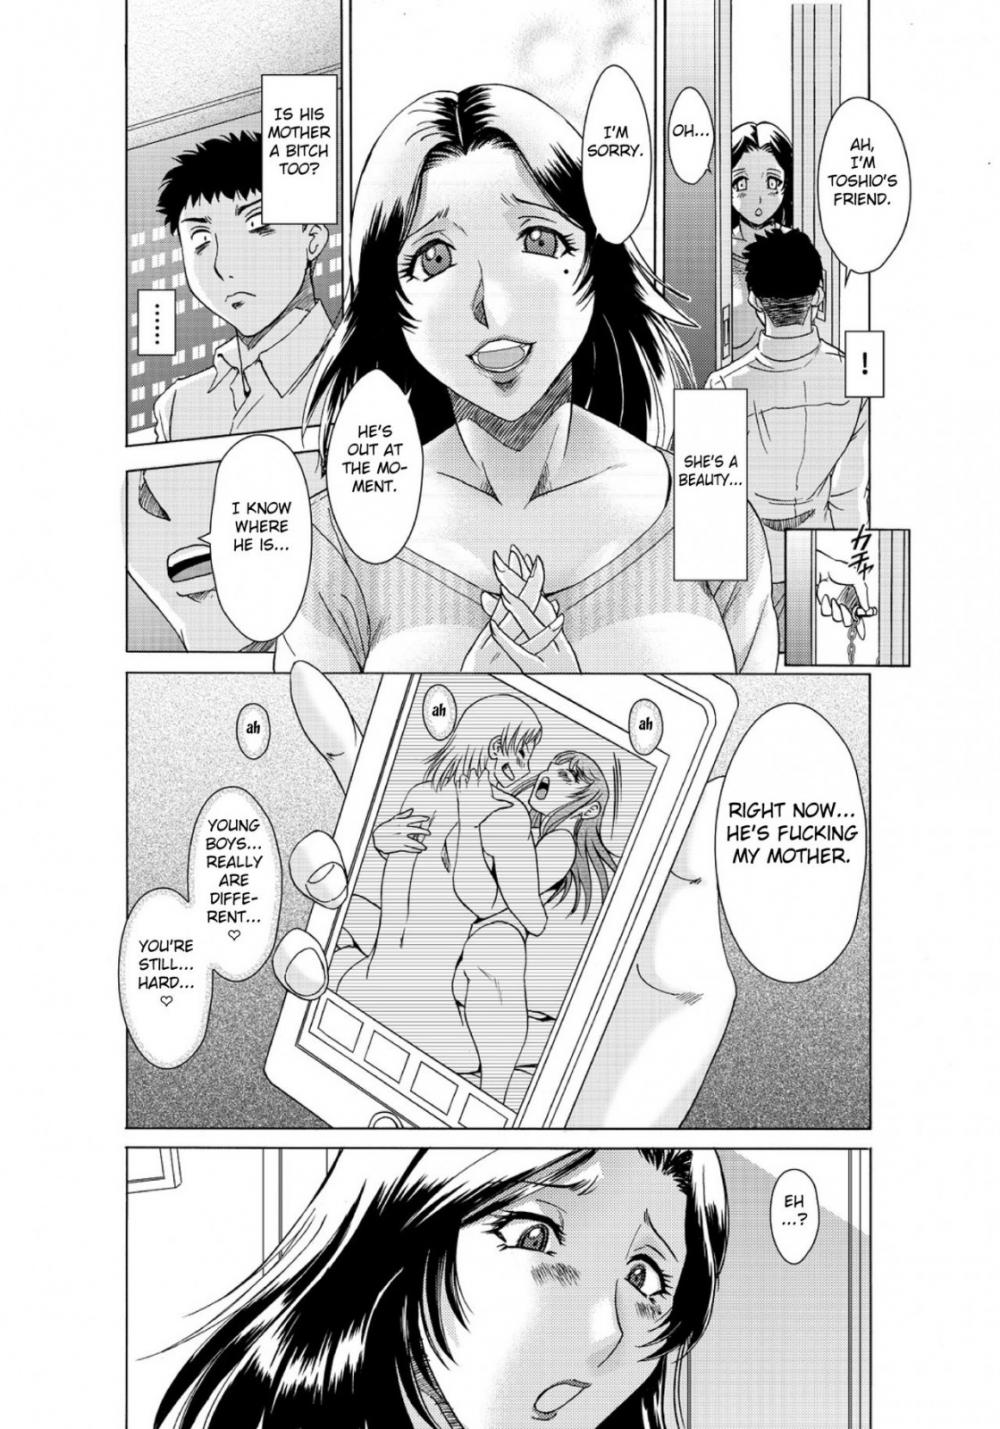 Hentai Manga Comic-The Son's Mom-Play ~She'll Looks At Her Son Sexually As She Thrusts Her Hips-Read-18